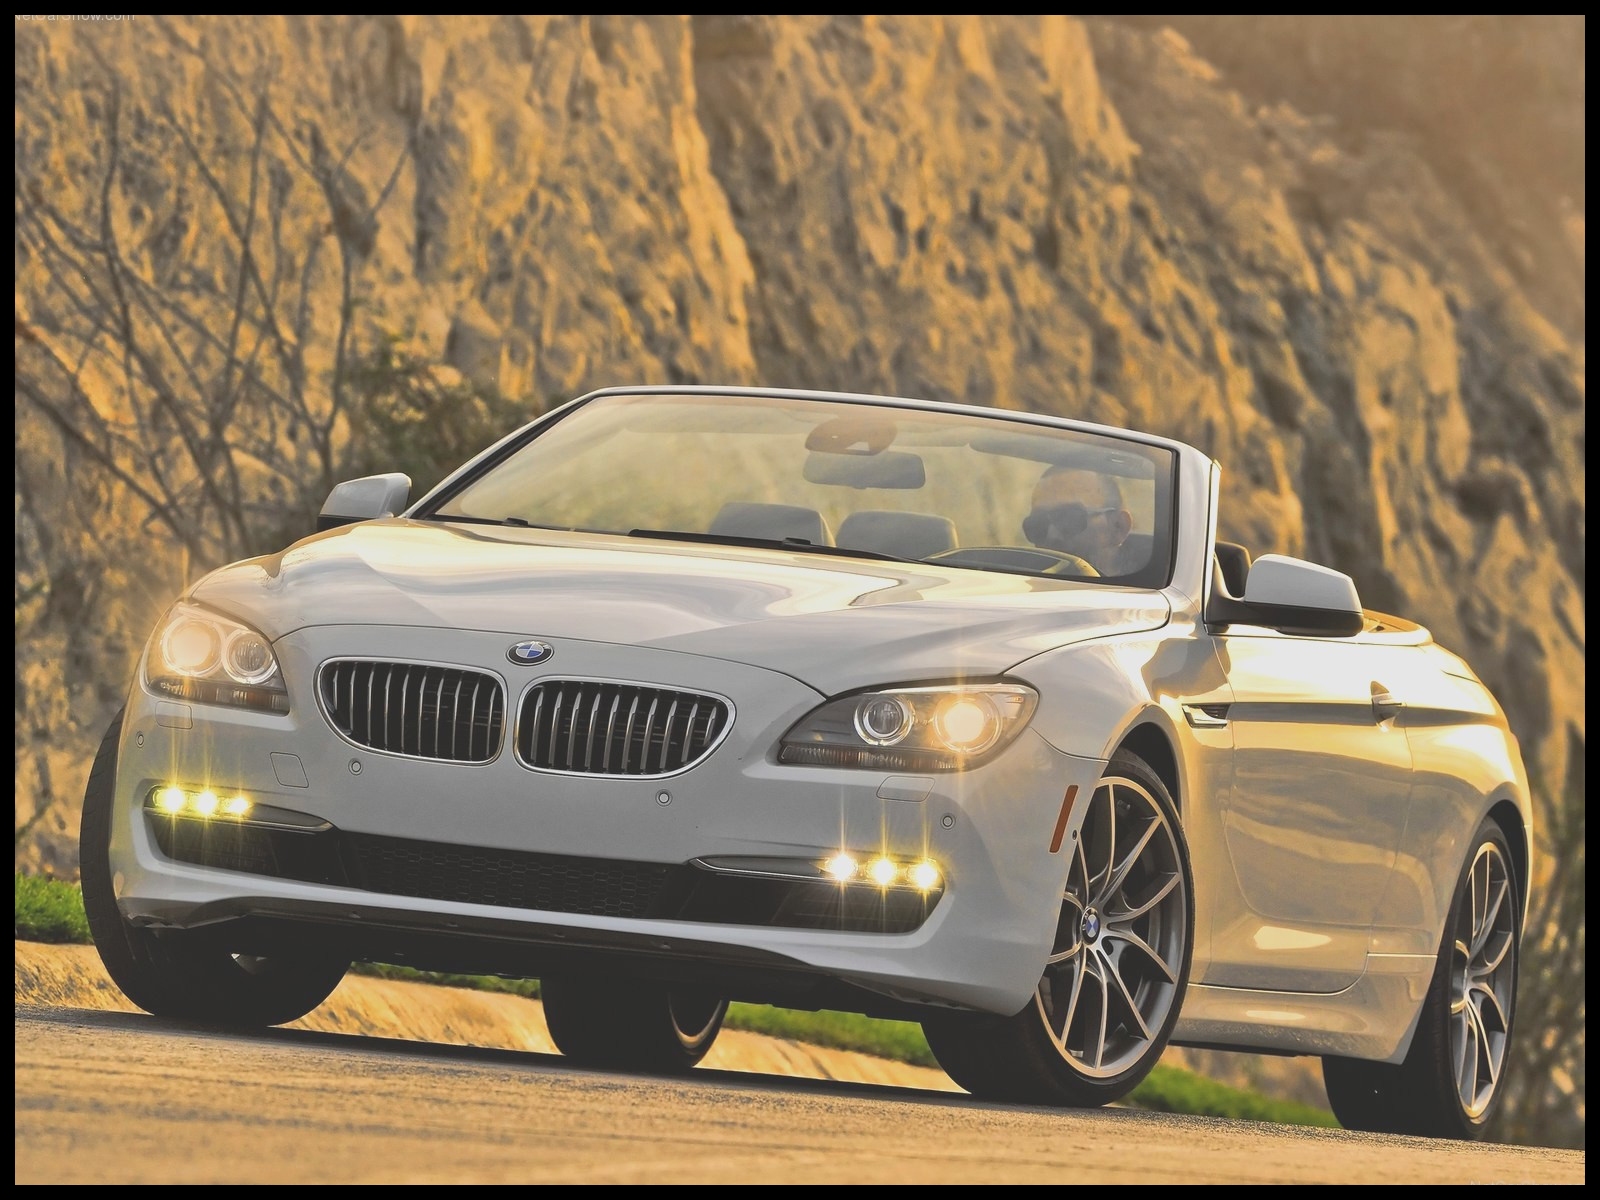 Bmw 6 Series Lovely Bmw 6 Series F13 Convertible S Gallery With New Bmw M6 Gran Coupe Wallpaper Netcarshow